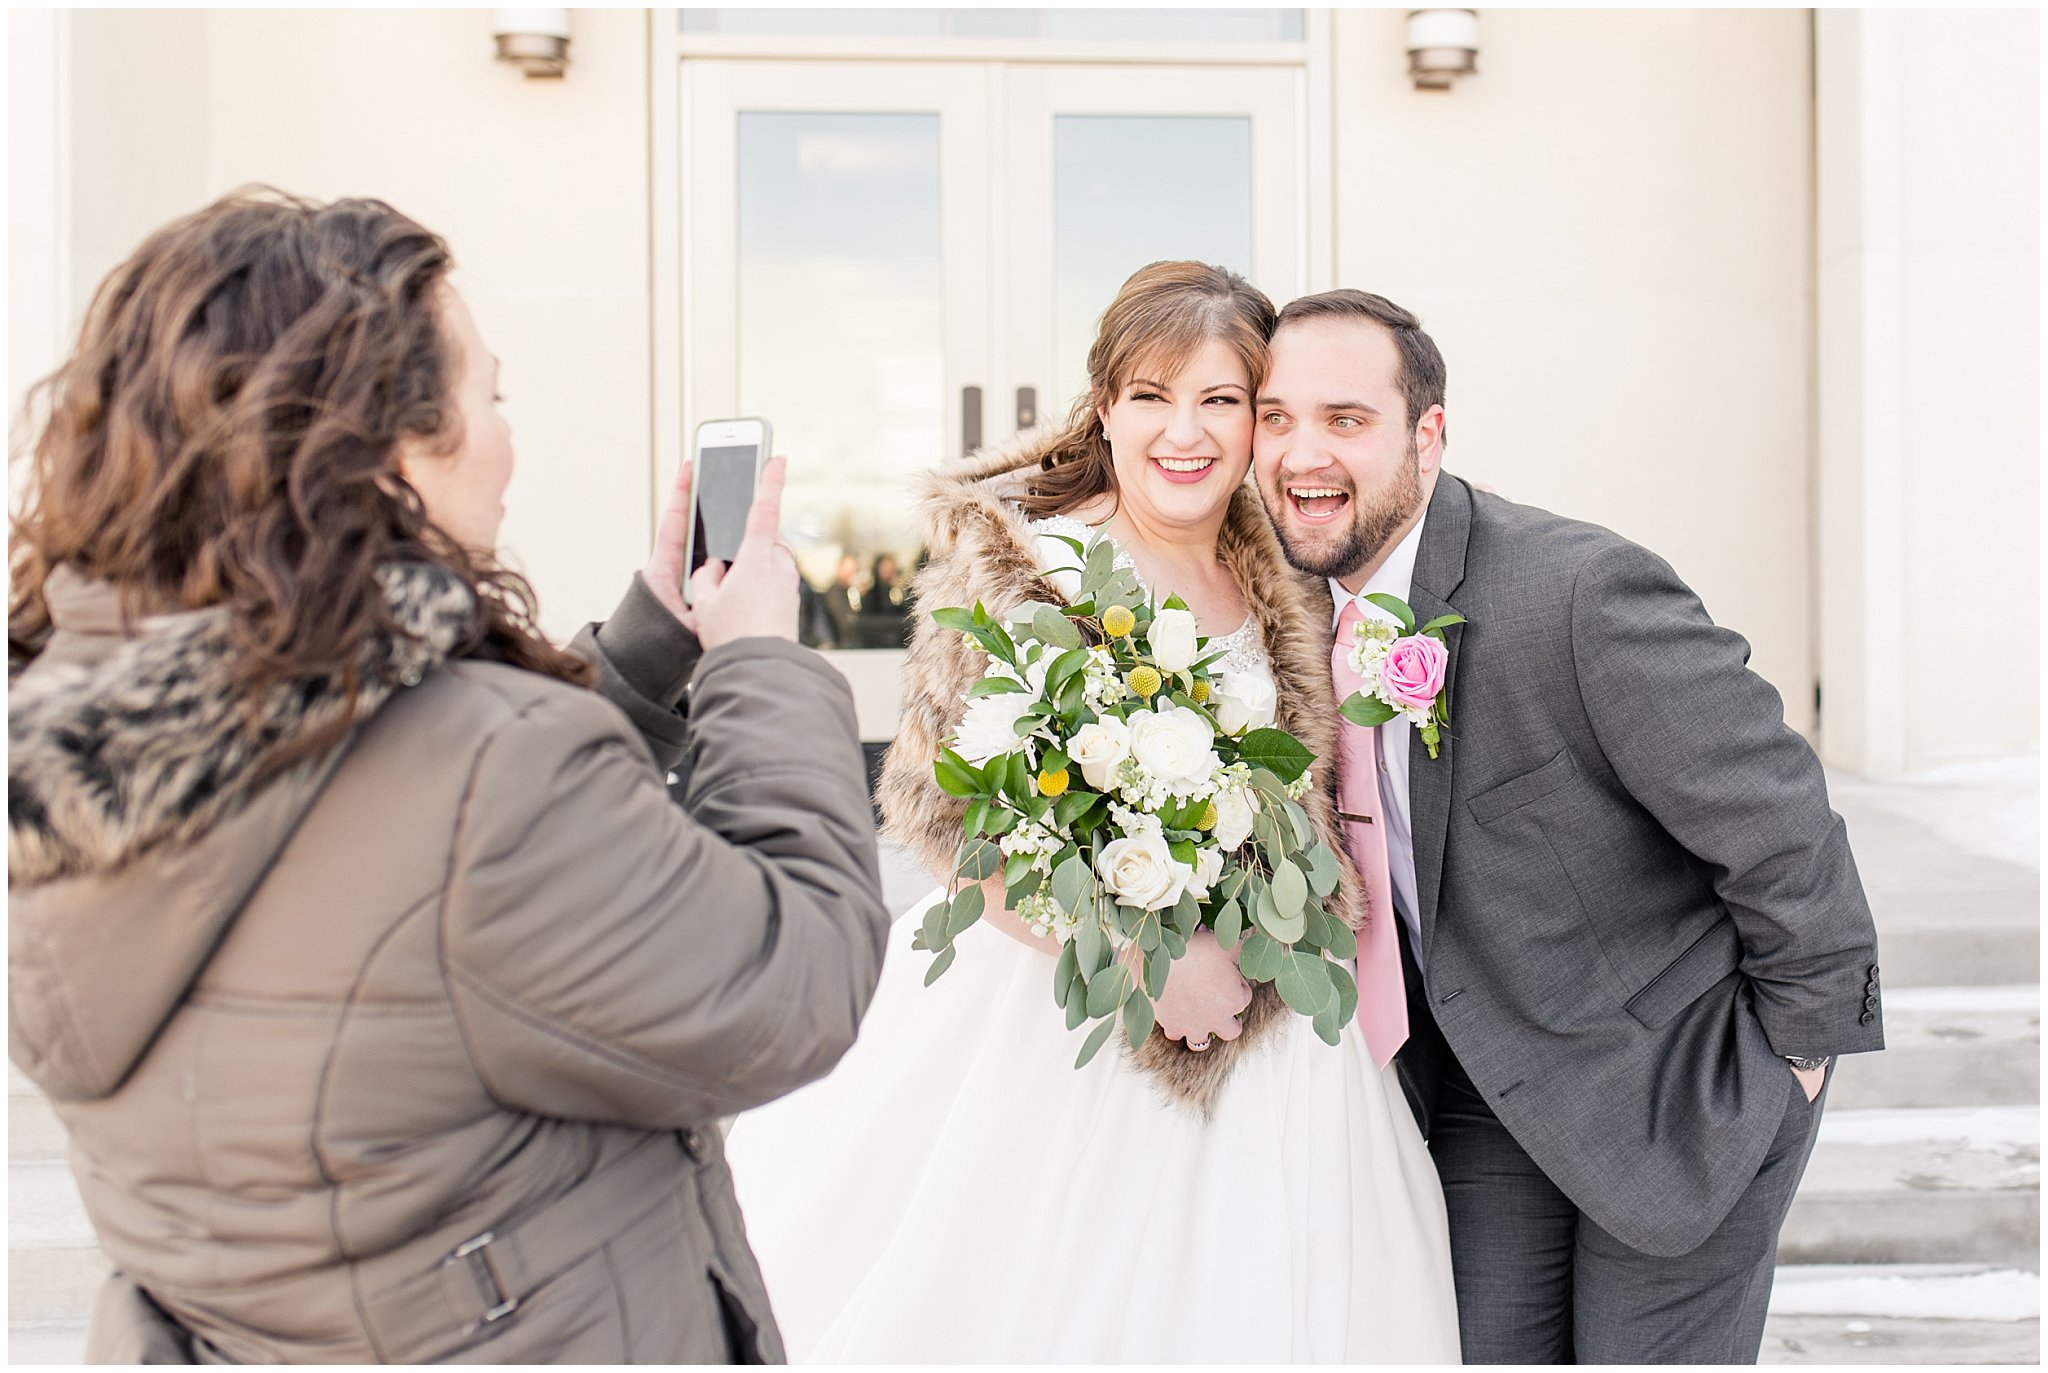 Bride and groom selfie | Ogden Temple Wedding | Jessie and Dallin Photography